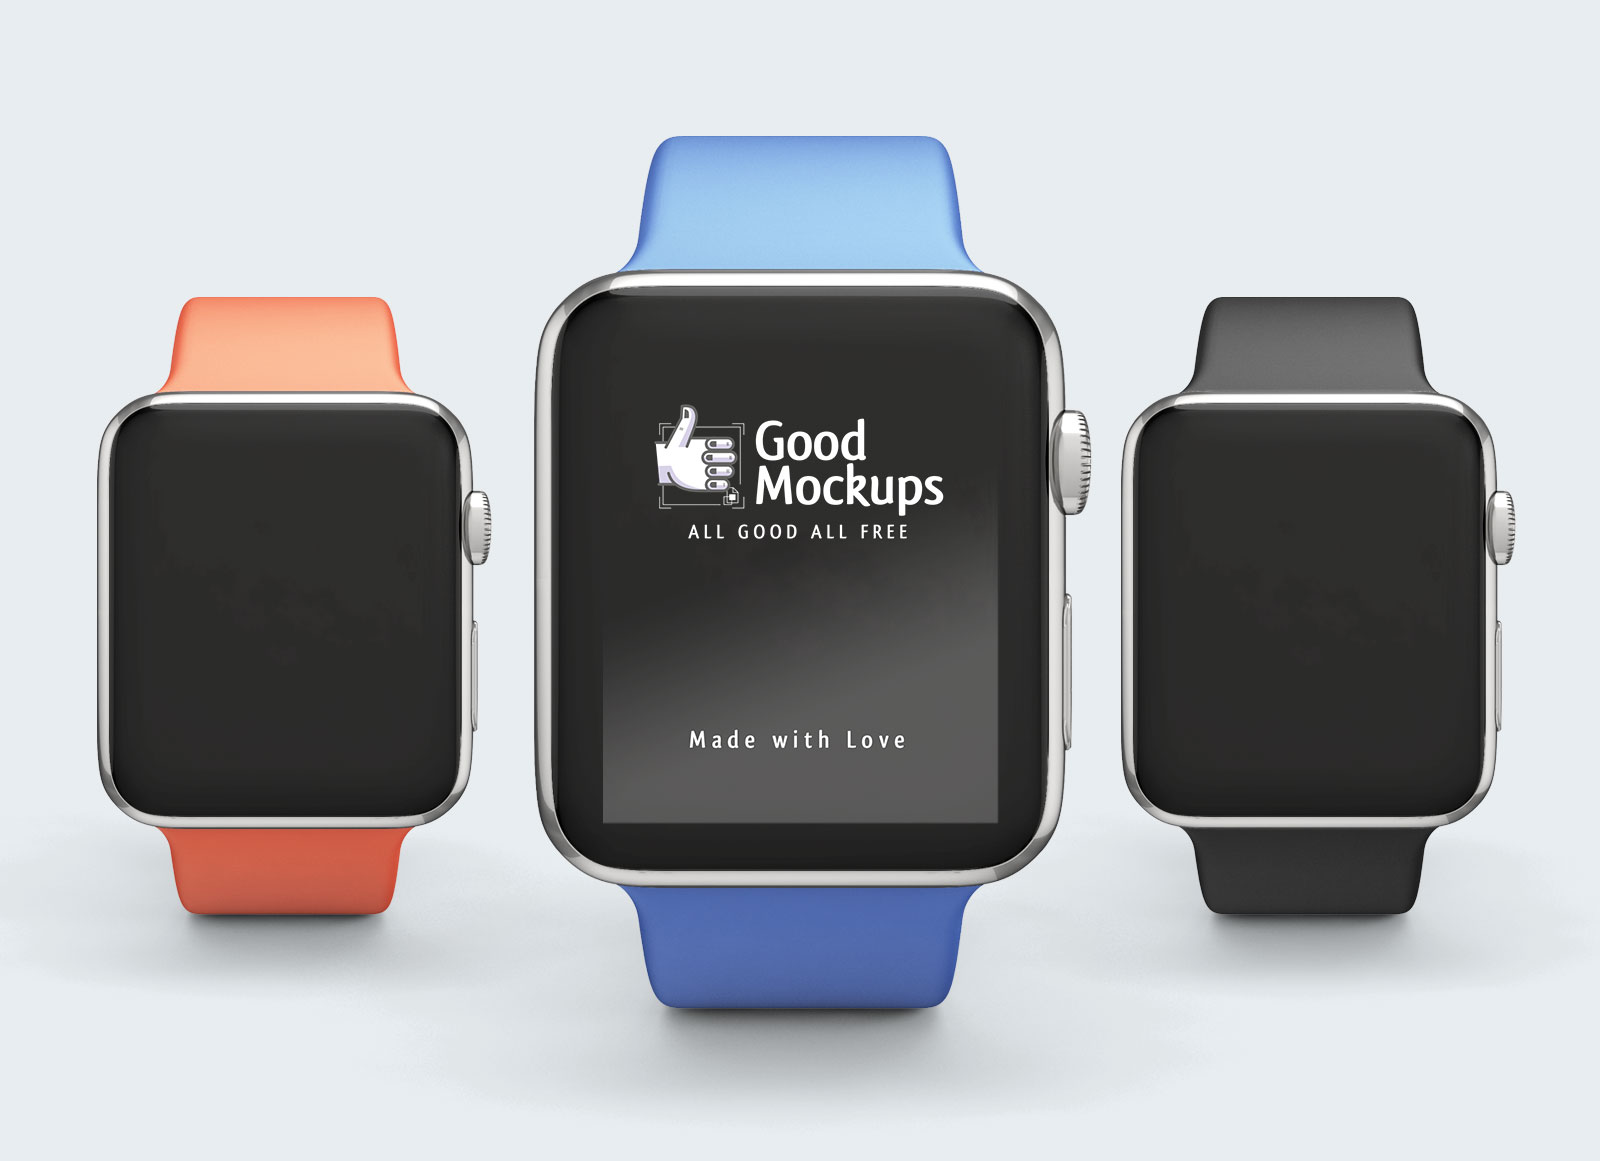 Download Free Apple Watch Mockup PSD with Changeable Sport Band Color - Good Mockups